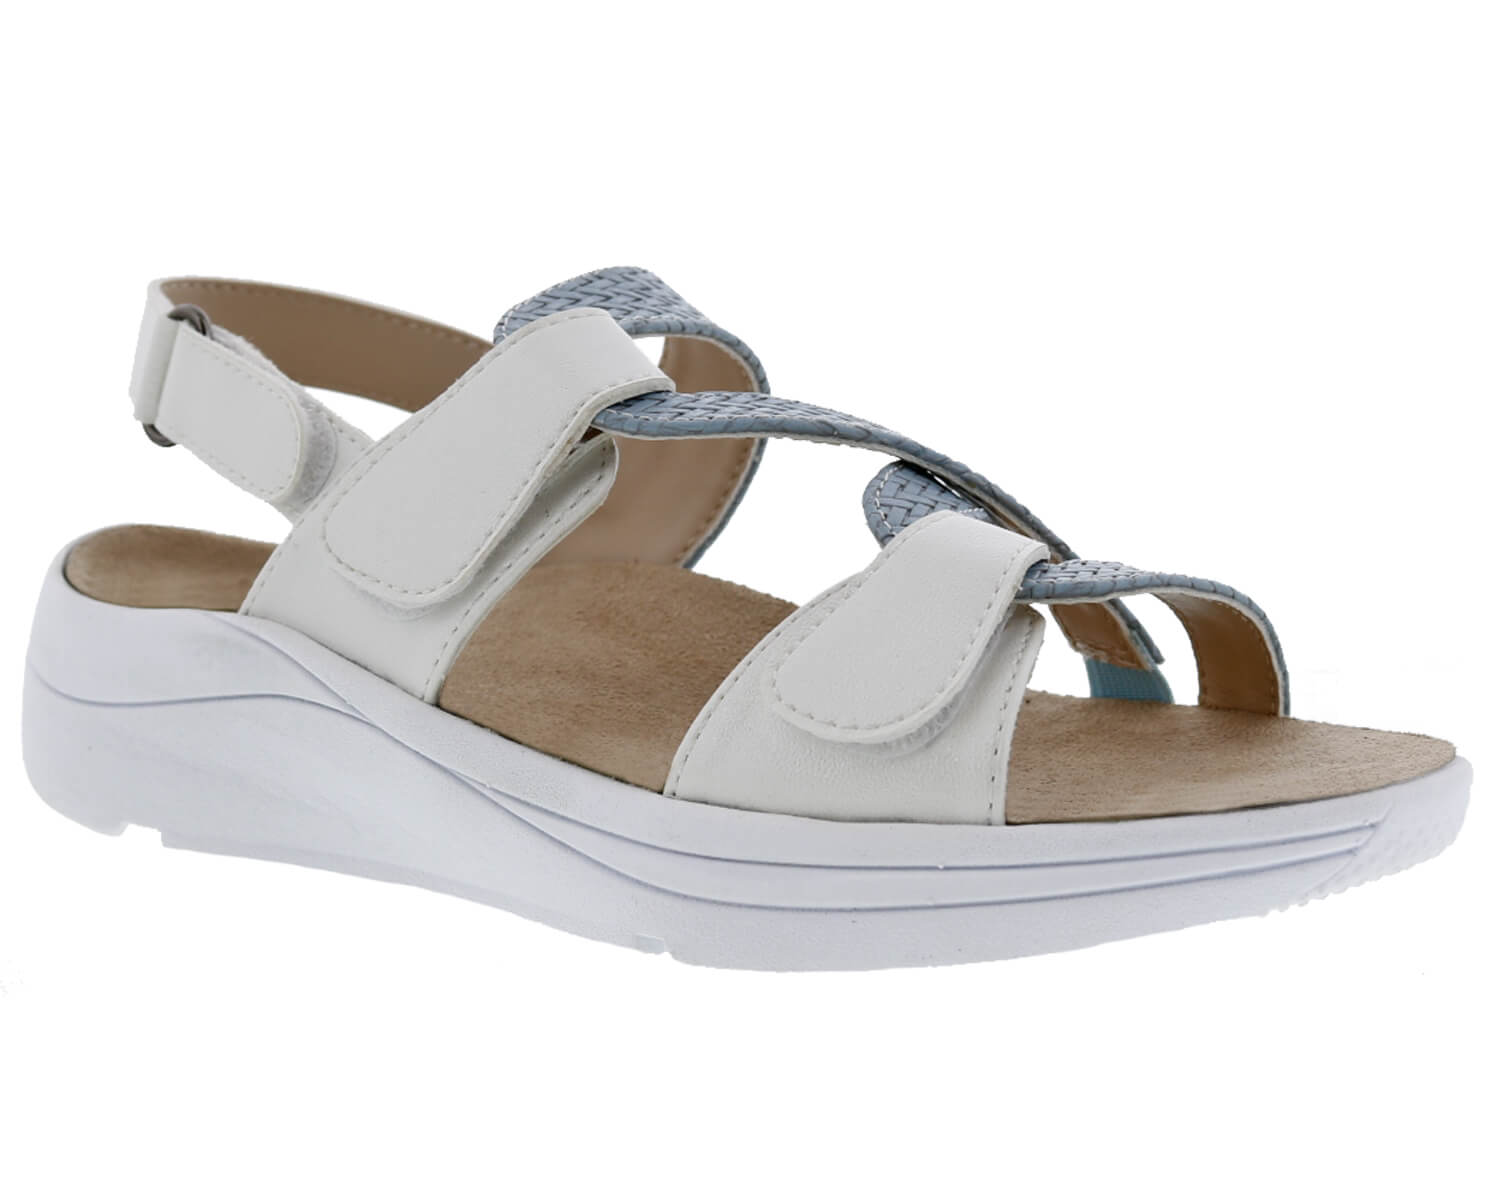 Drew Shoes Serenity 17200 Women's Sandal - Comfort Therapeutic Sandal - Removable Footbed